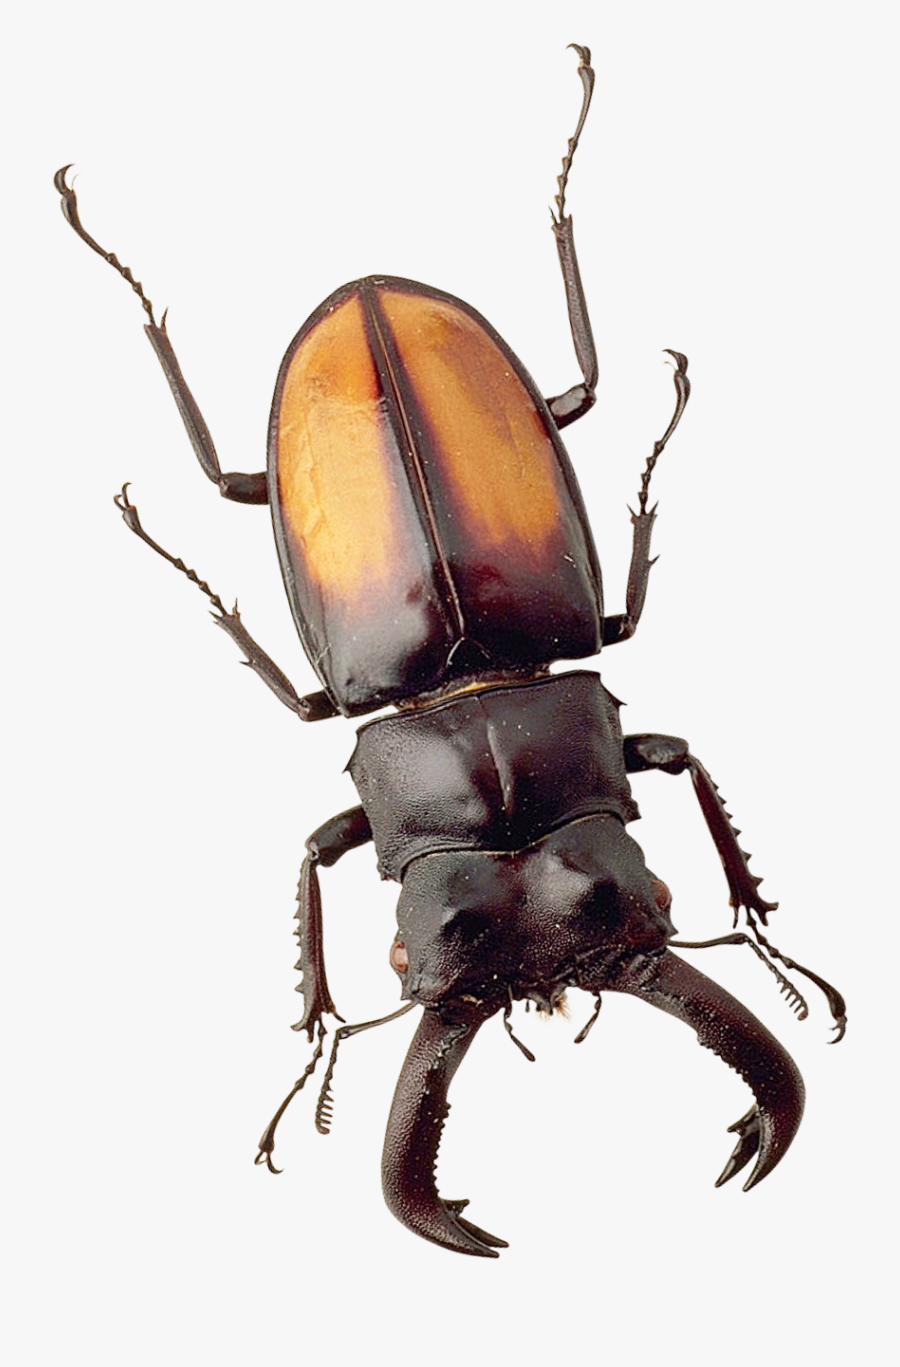 Png Image Purepng Free - Beetle Png, Transparent Clipart